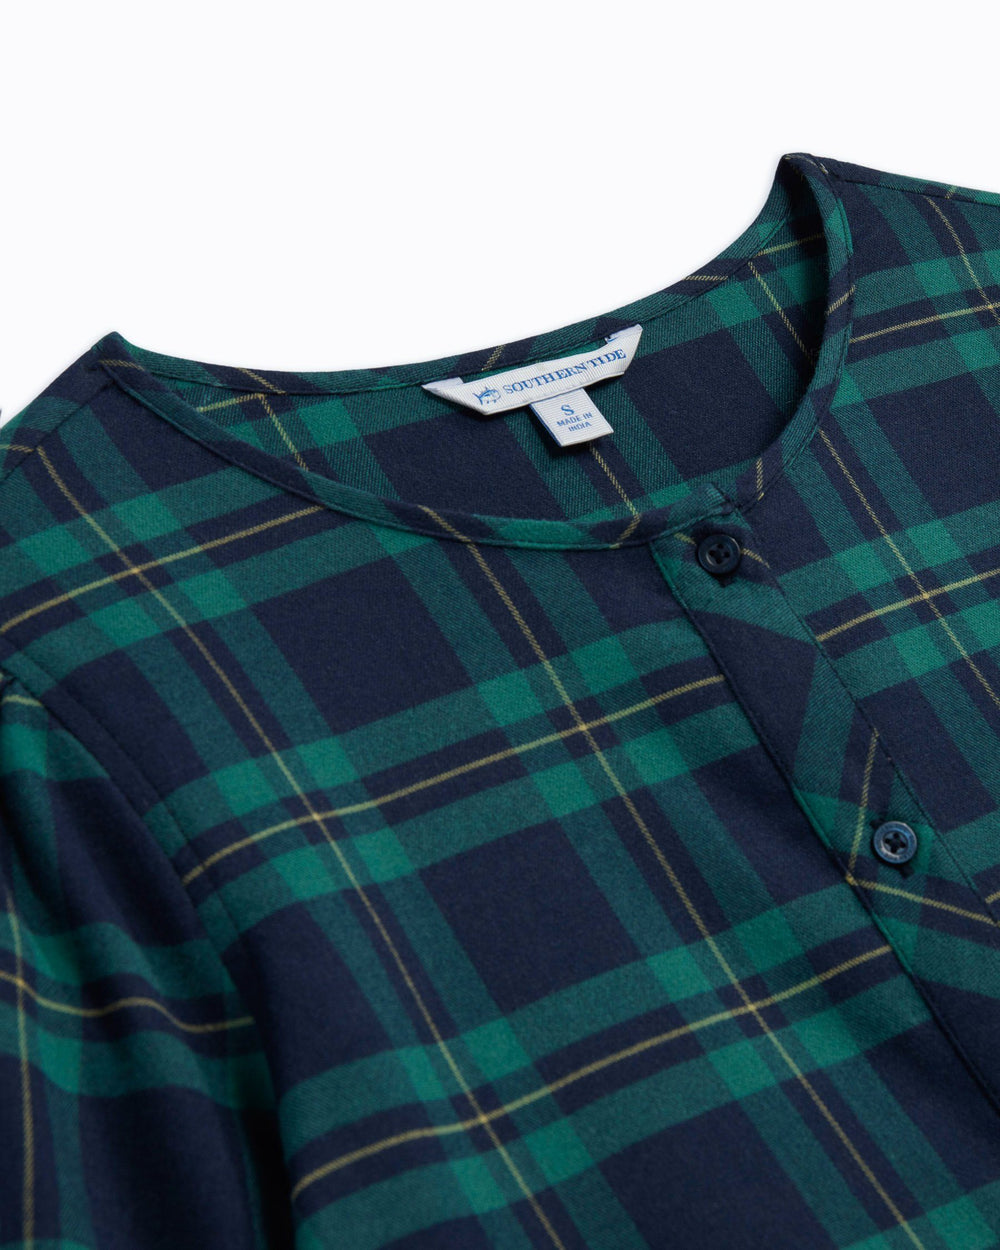 The flat detail of the Women's Preston Flannel Intercoastal Top by Southern Tide - Evening Emerald